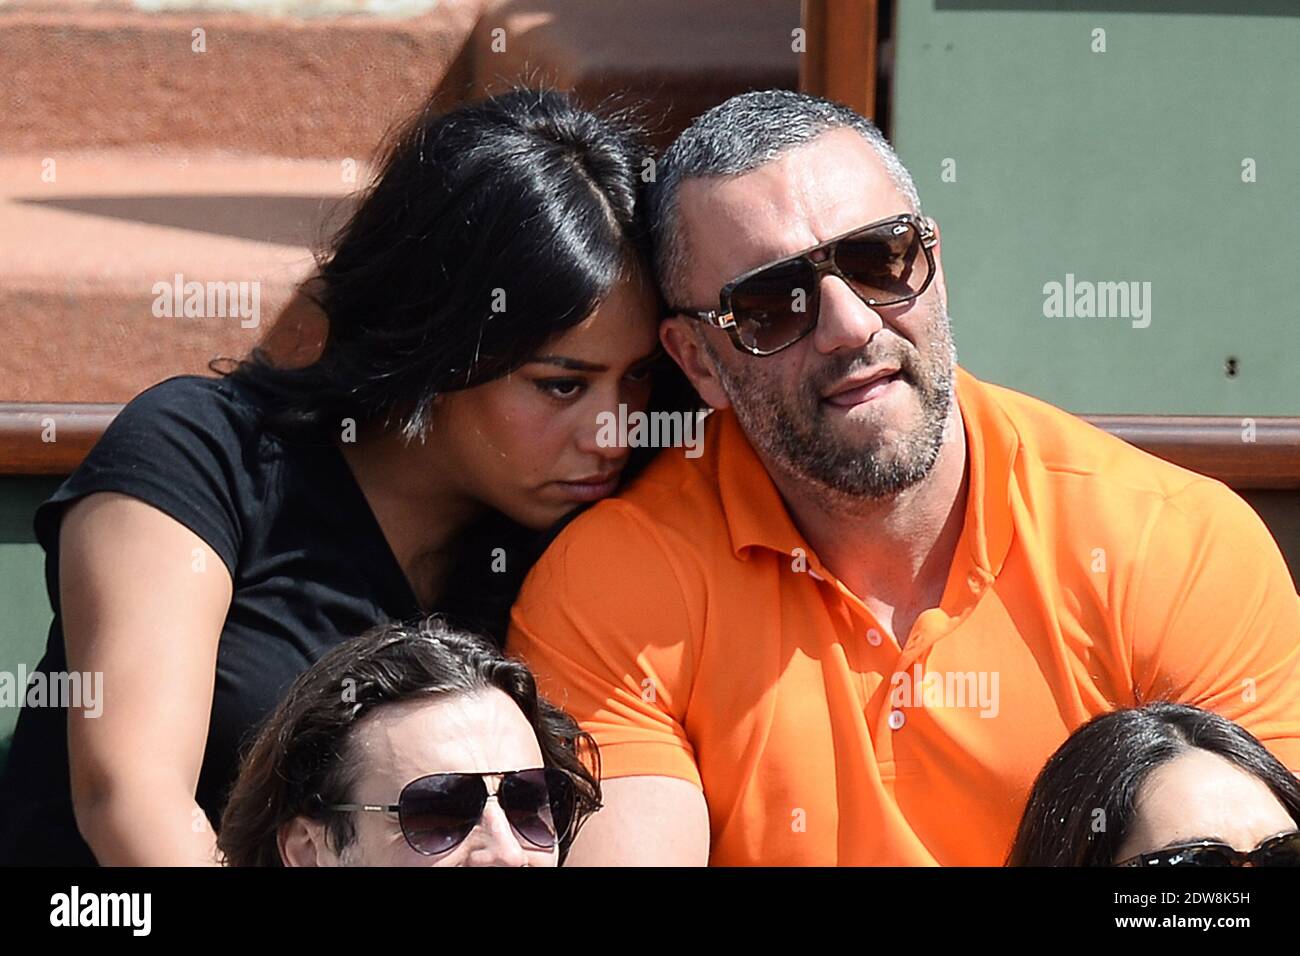 Amel Bent and her boyfriend Patrick Antonelli attending Day 12 of the French Open 2014 held at Roland-Garros stadium on June 5, 2014 in Paris, France. Photo by Laurent Zabulon/ABACAPRESS.COM Stock Photo